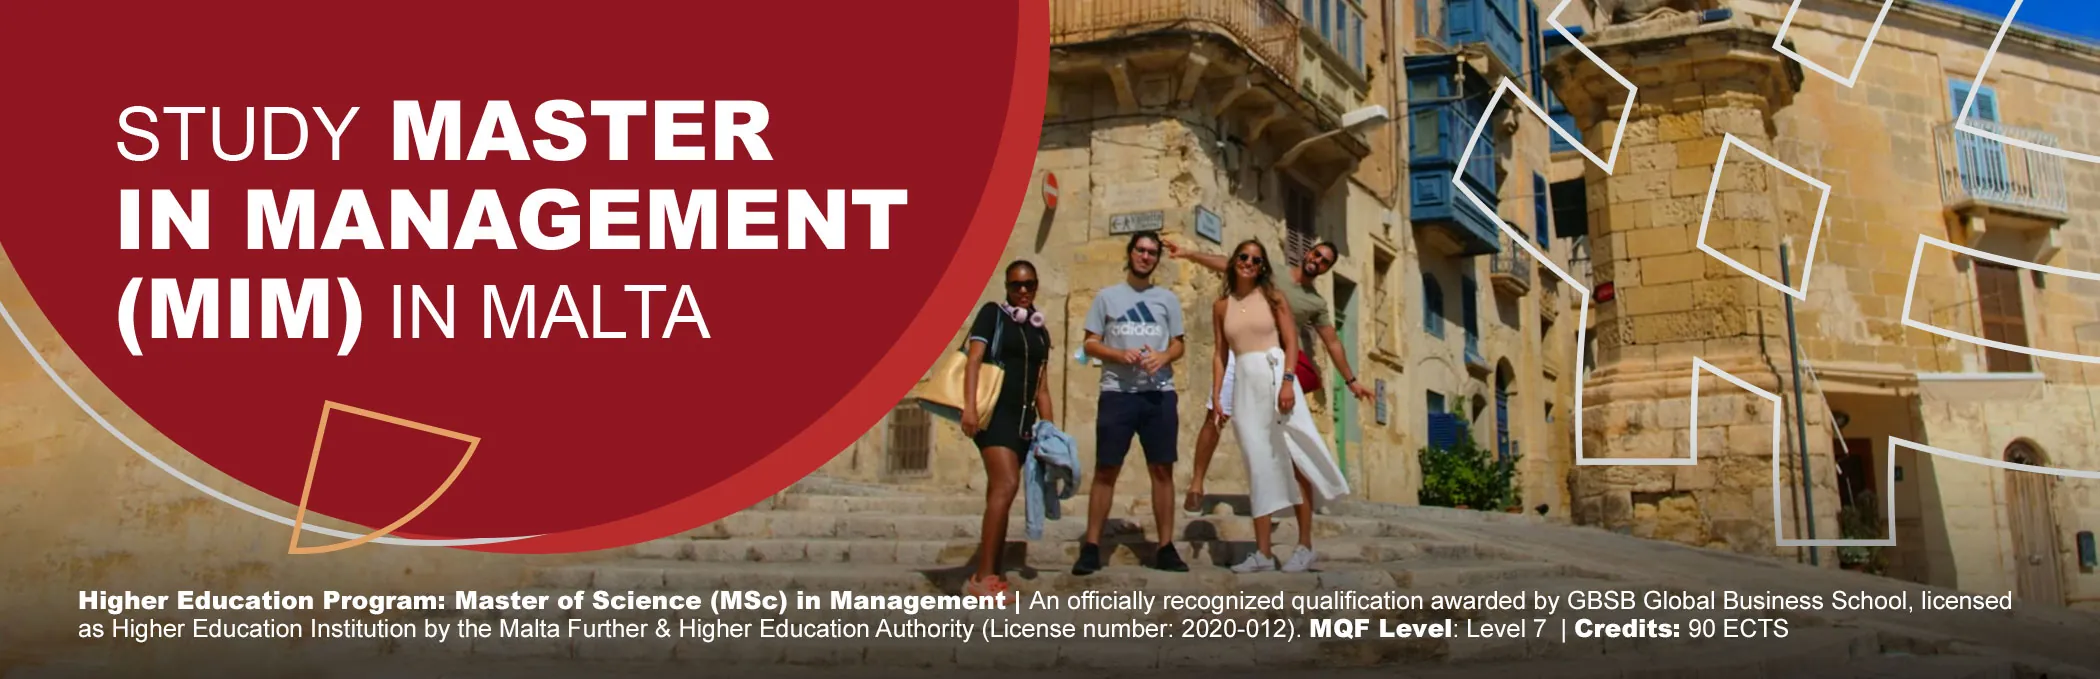 GBSB Global Business School in Europe Master in Management Banner